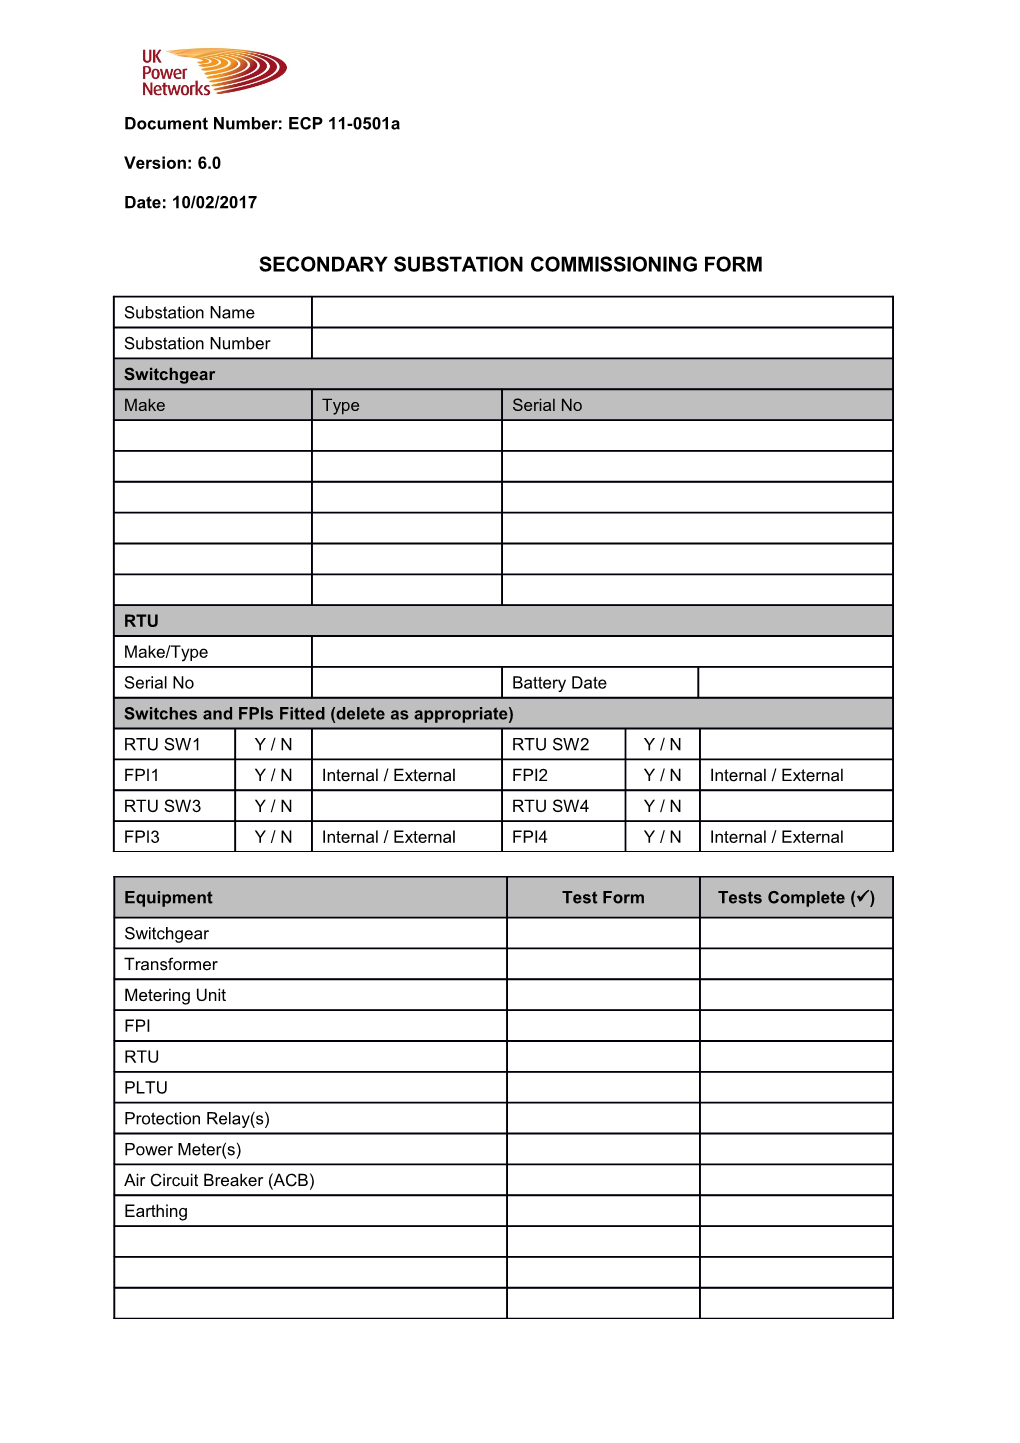 ECP 11-0501A Secondary Substation Commissioning Form